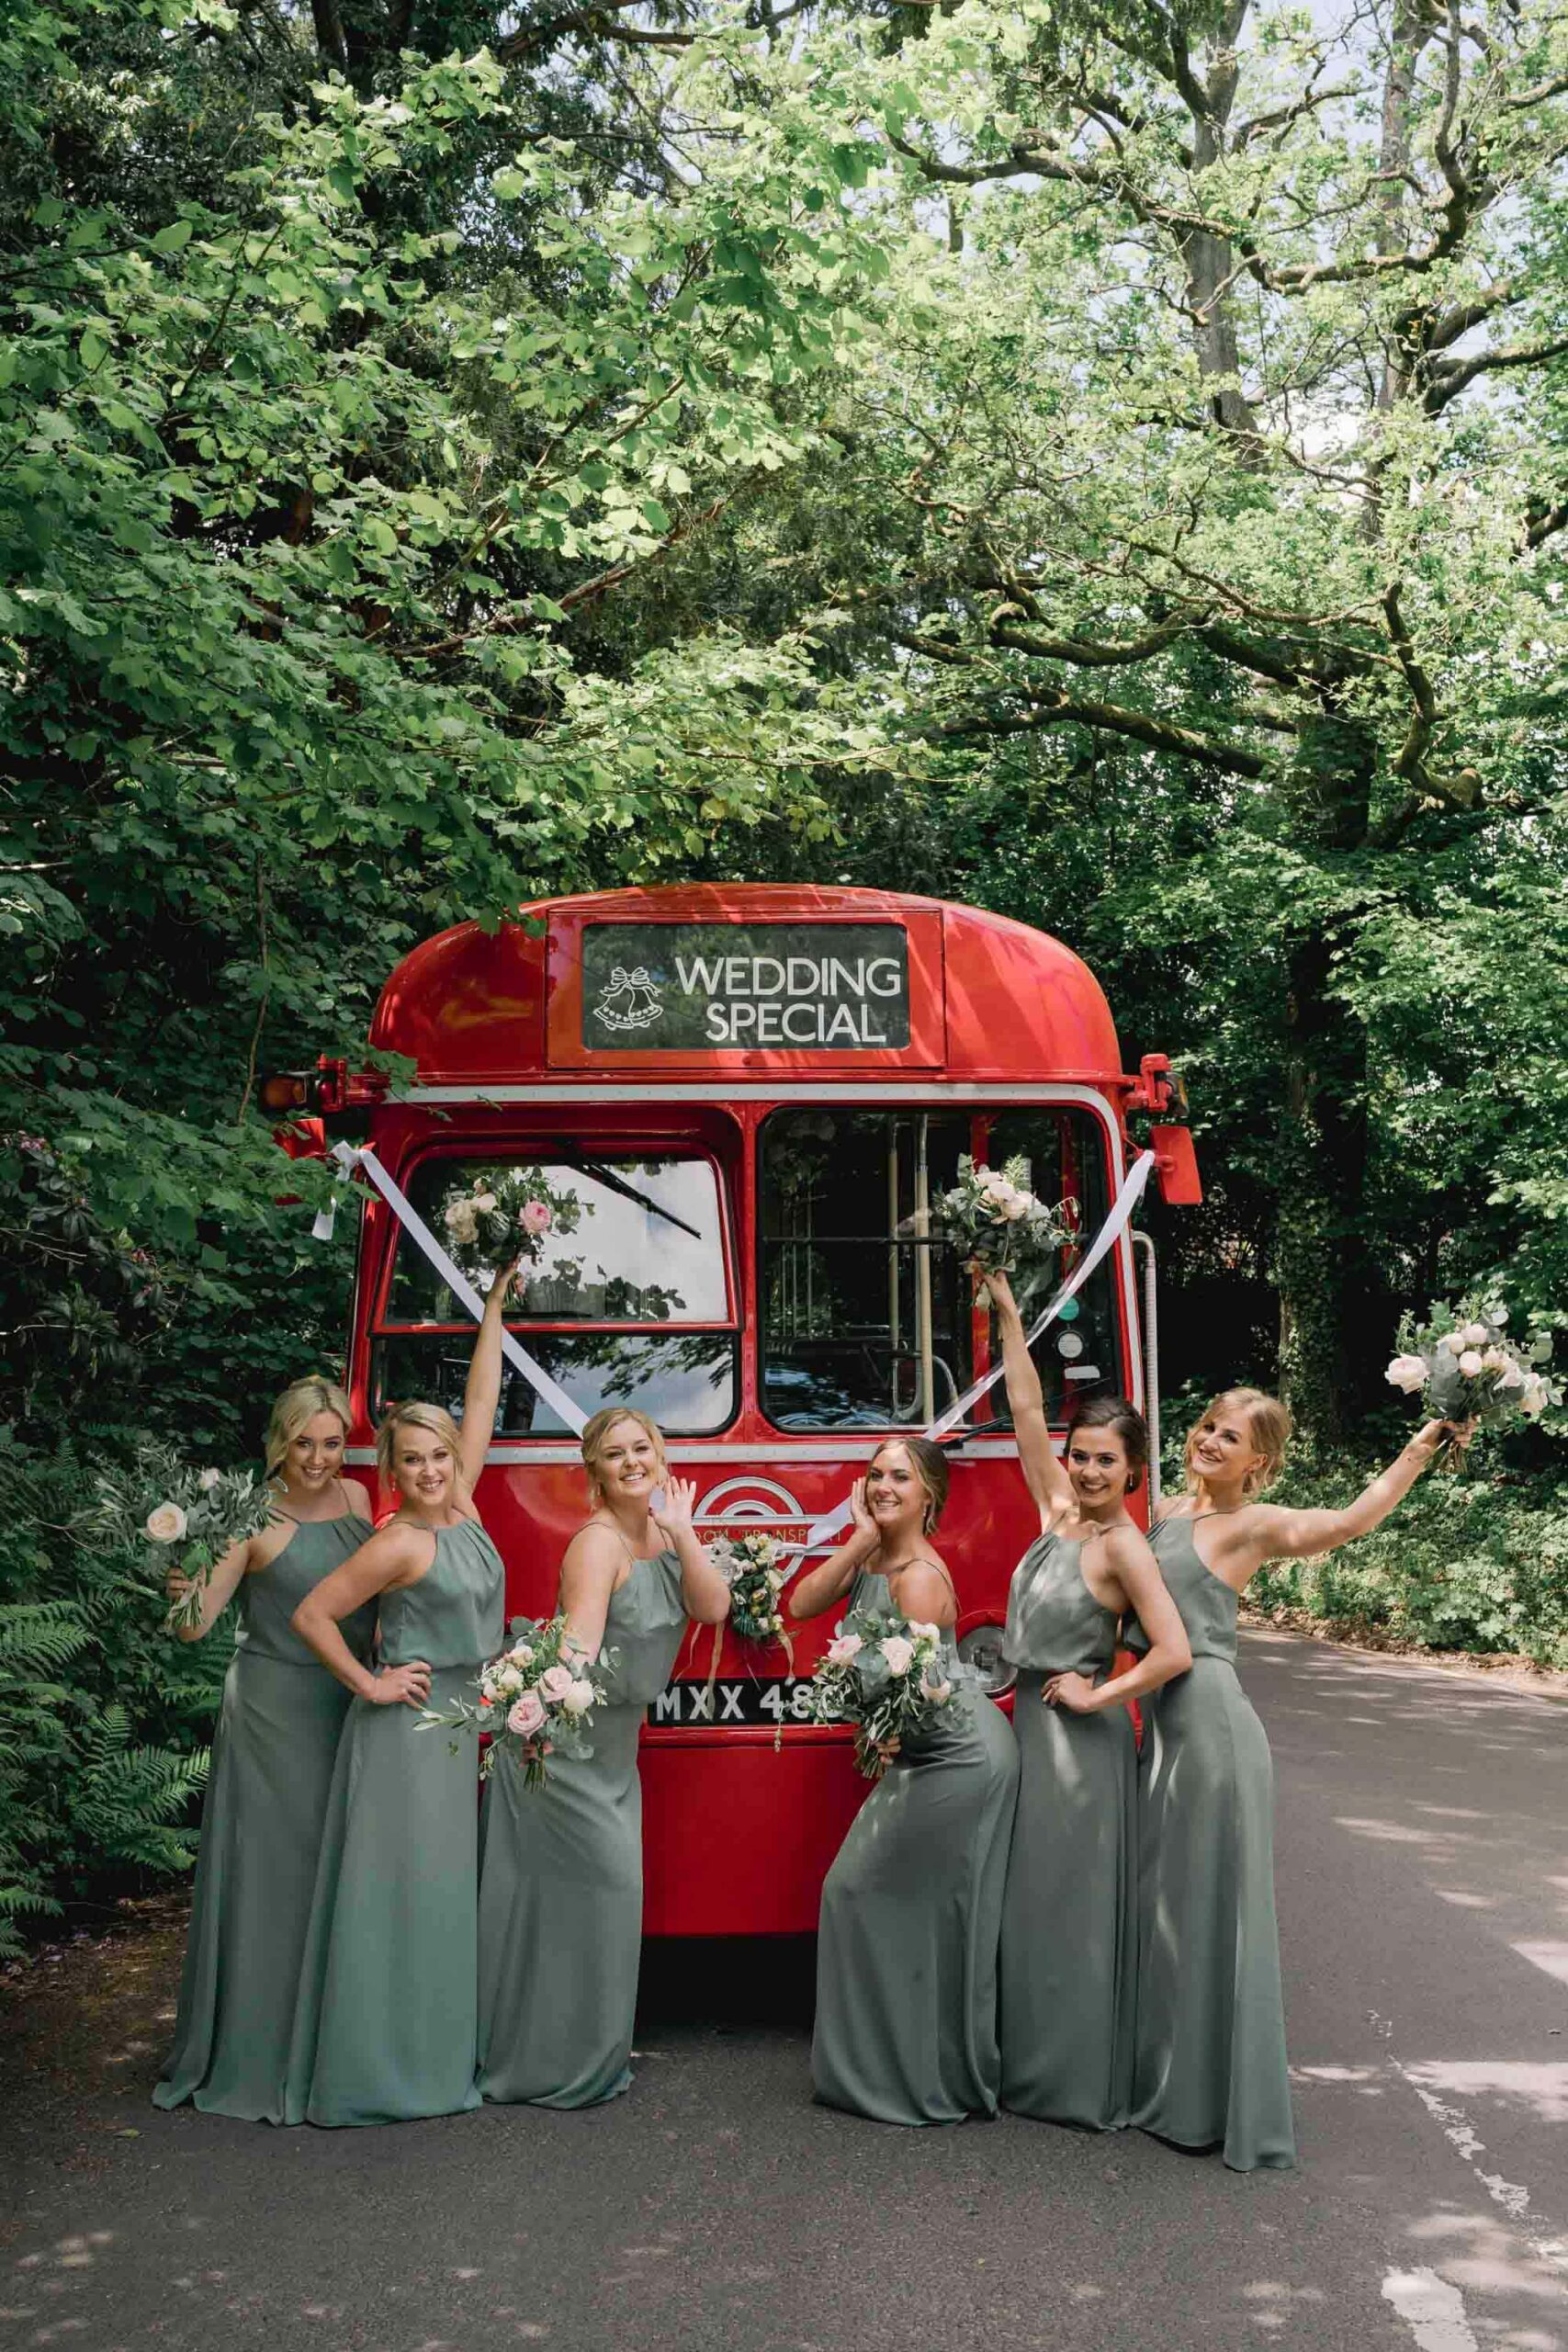 Wedding photography with bridesmaids posing in front of a red doubke decker bus.